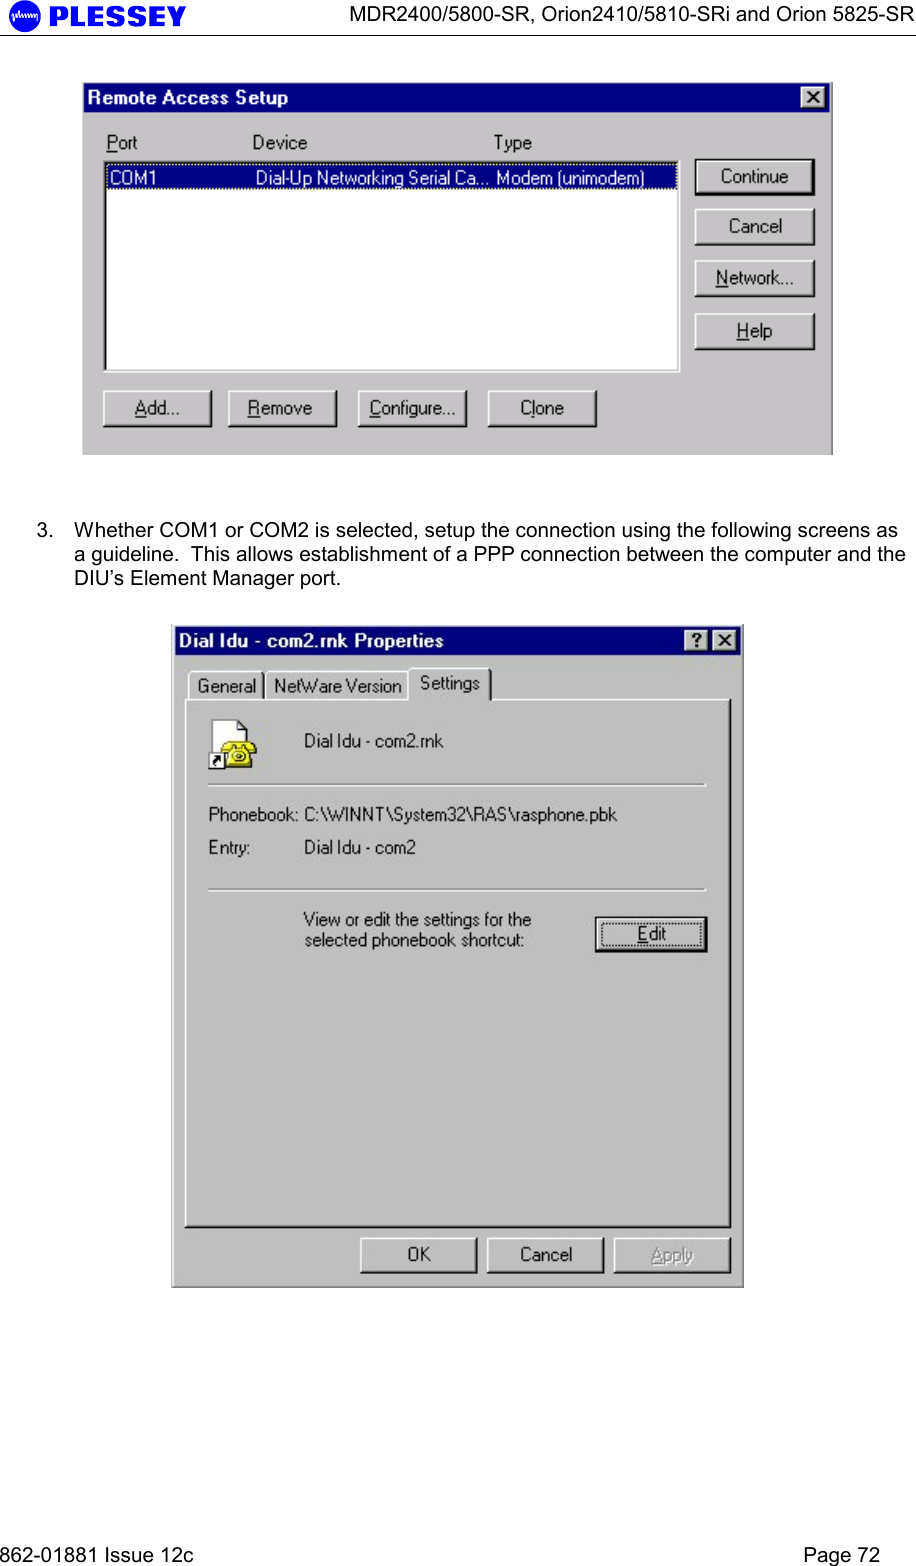      MDR2400/5800-SR, Orion2410/5810-SRi and Orion 5825-SR   862-01881 Issue 12c    Page 72    3.  Whether COM1 or COM2 is selected, setup the connection using the following screens as a guideline.  This allows establishment of a PPP connection between the computer and the DIU’s Element Manager port.     